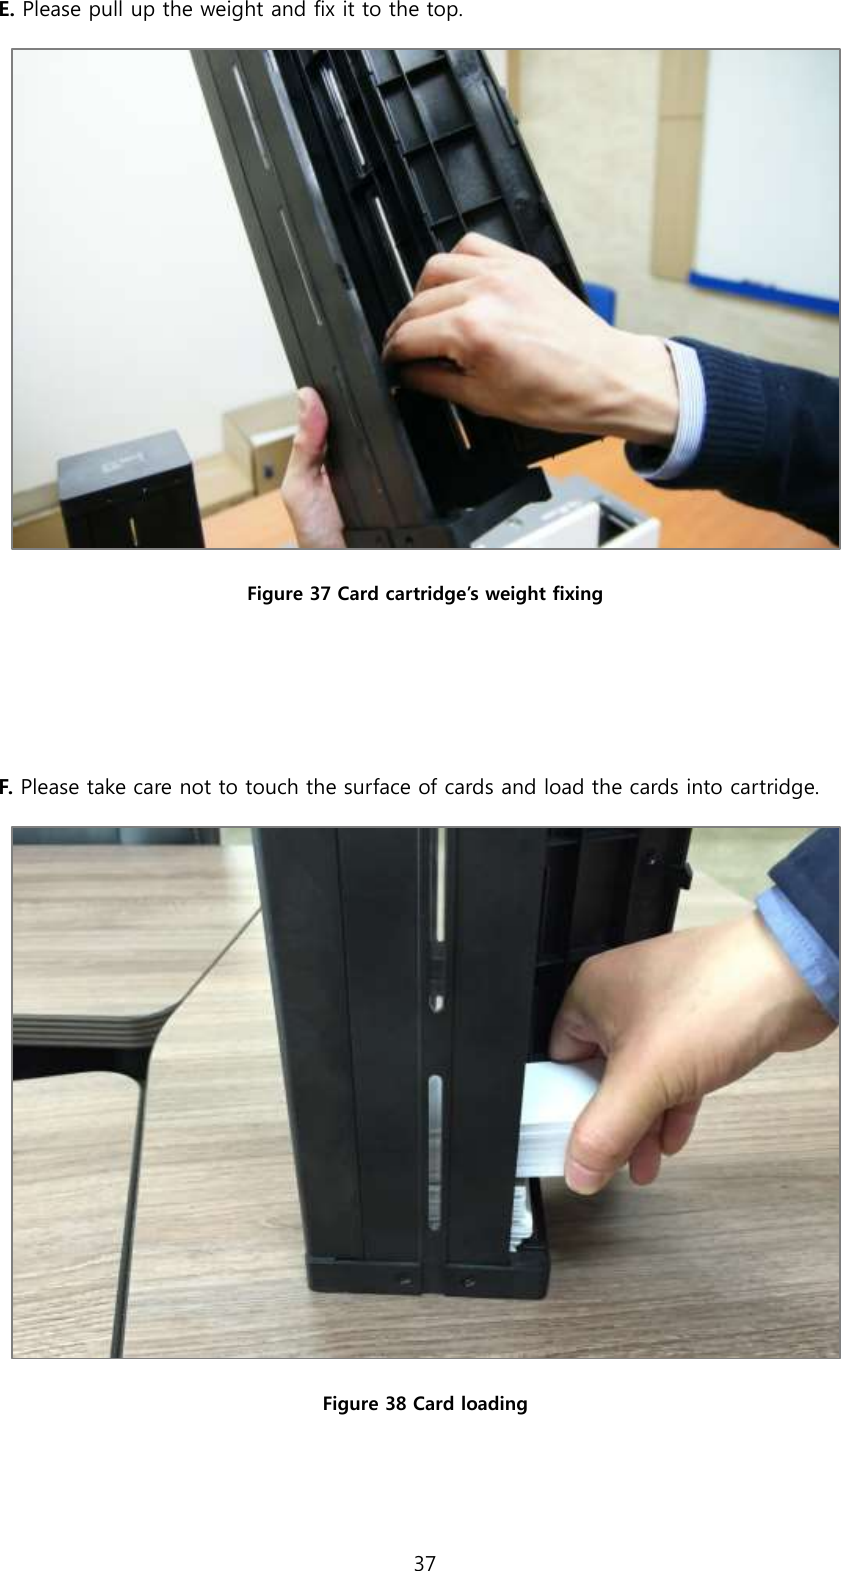 37  E. Please pull up the weight and fix it to the top.  Figure 37 Card cartridge’s weight fixing   F. Please take care not to touch the surface of cards and load the cards into cartridge.  Figure 38 Card loading  